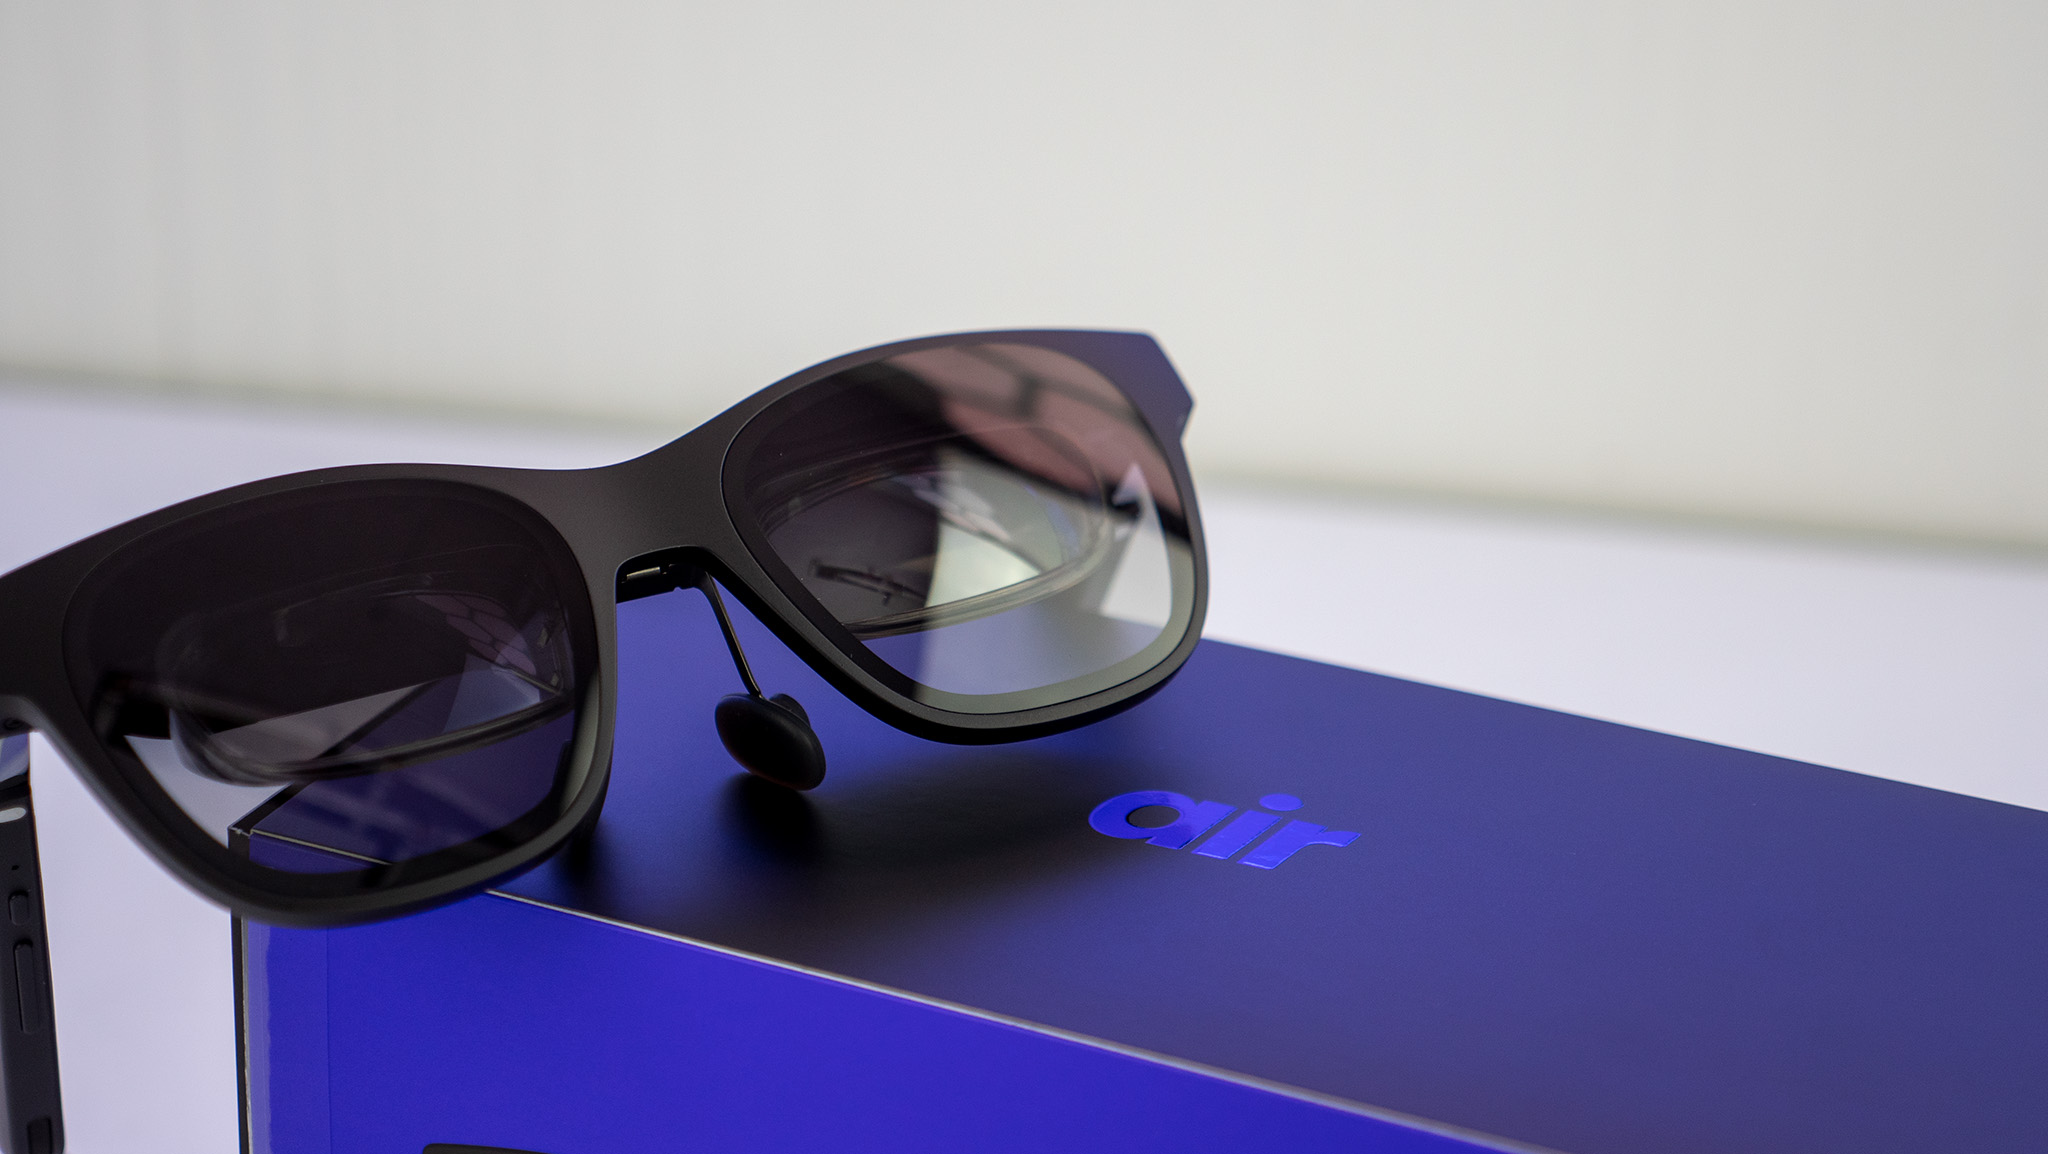 Nreal Air AR glasses with its box